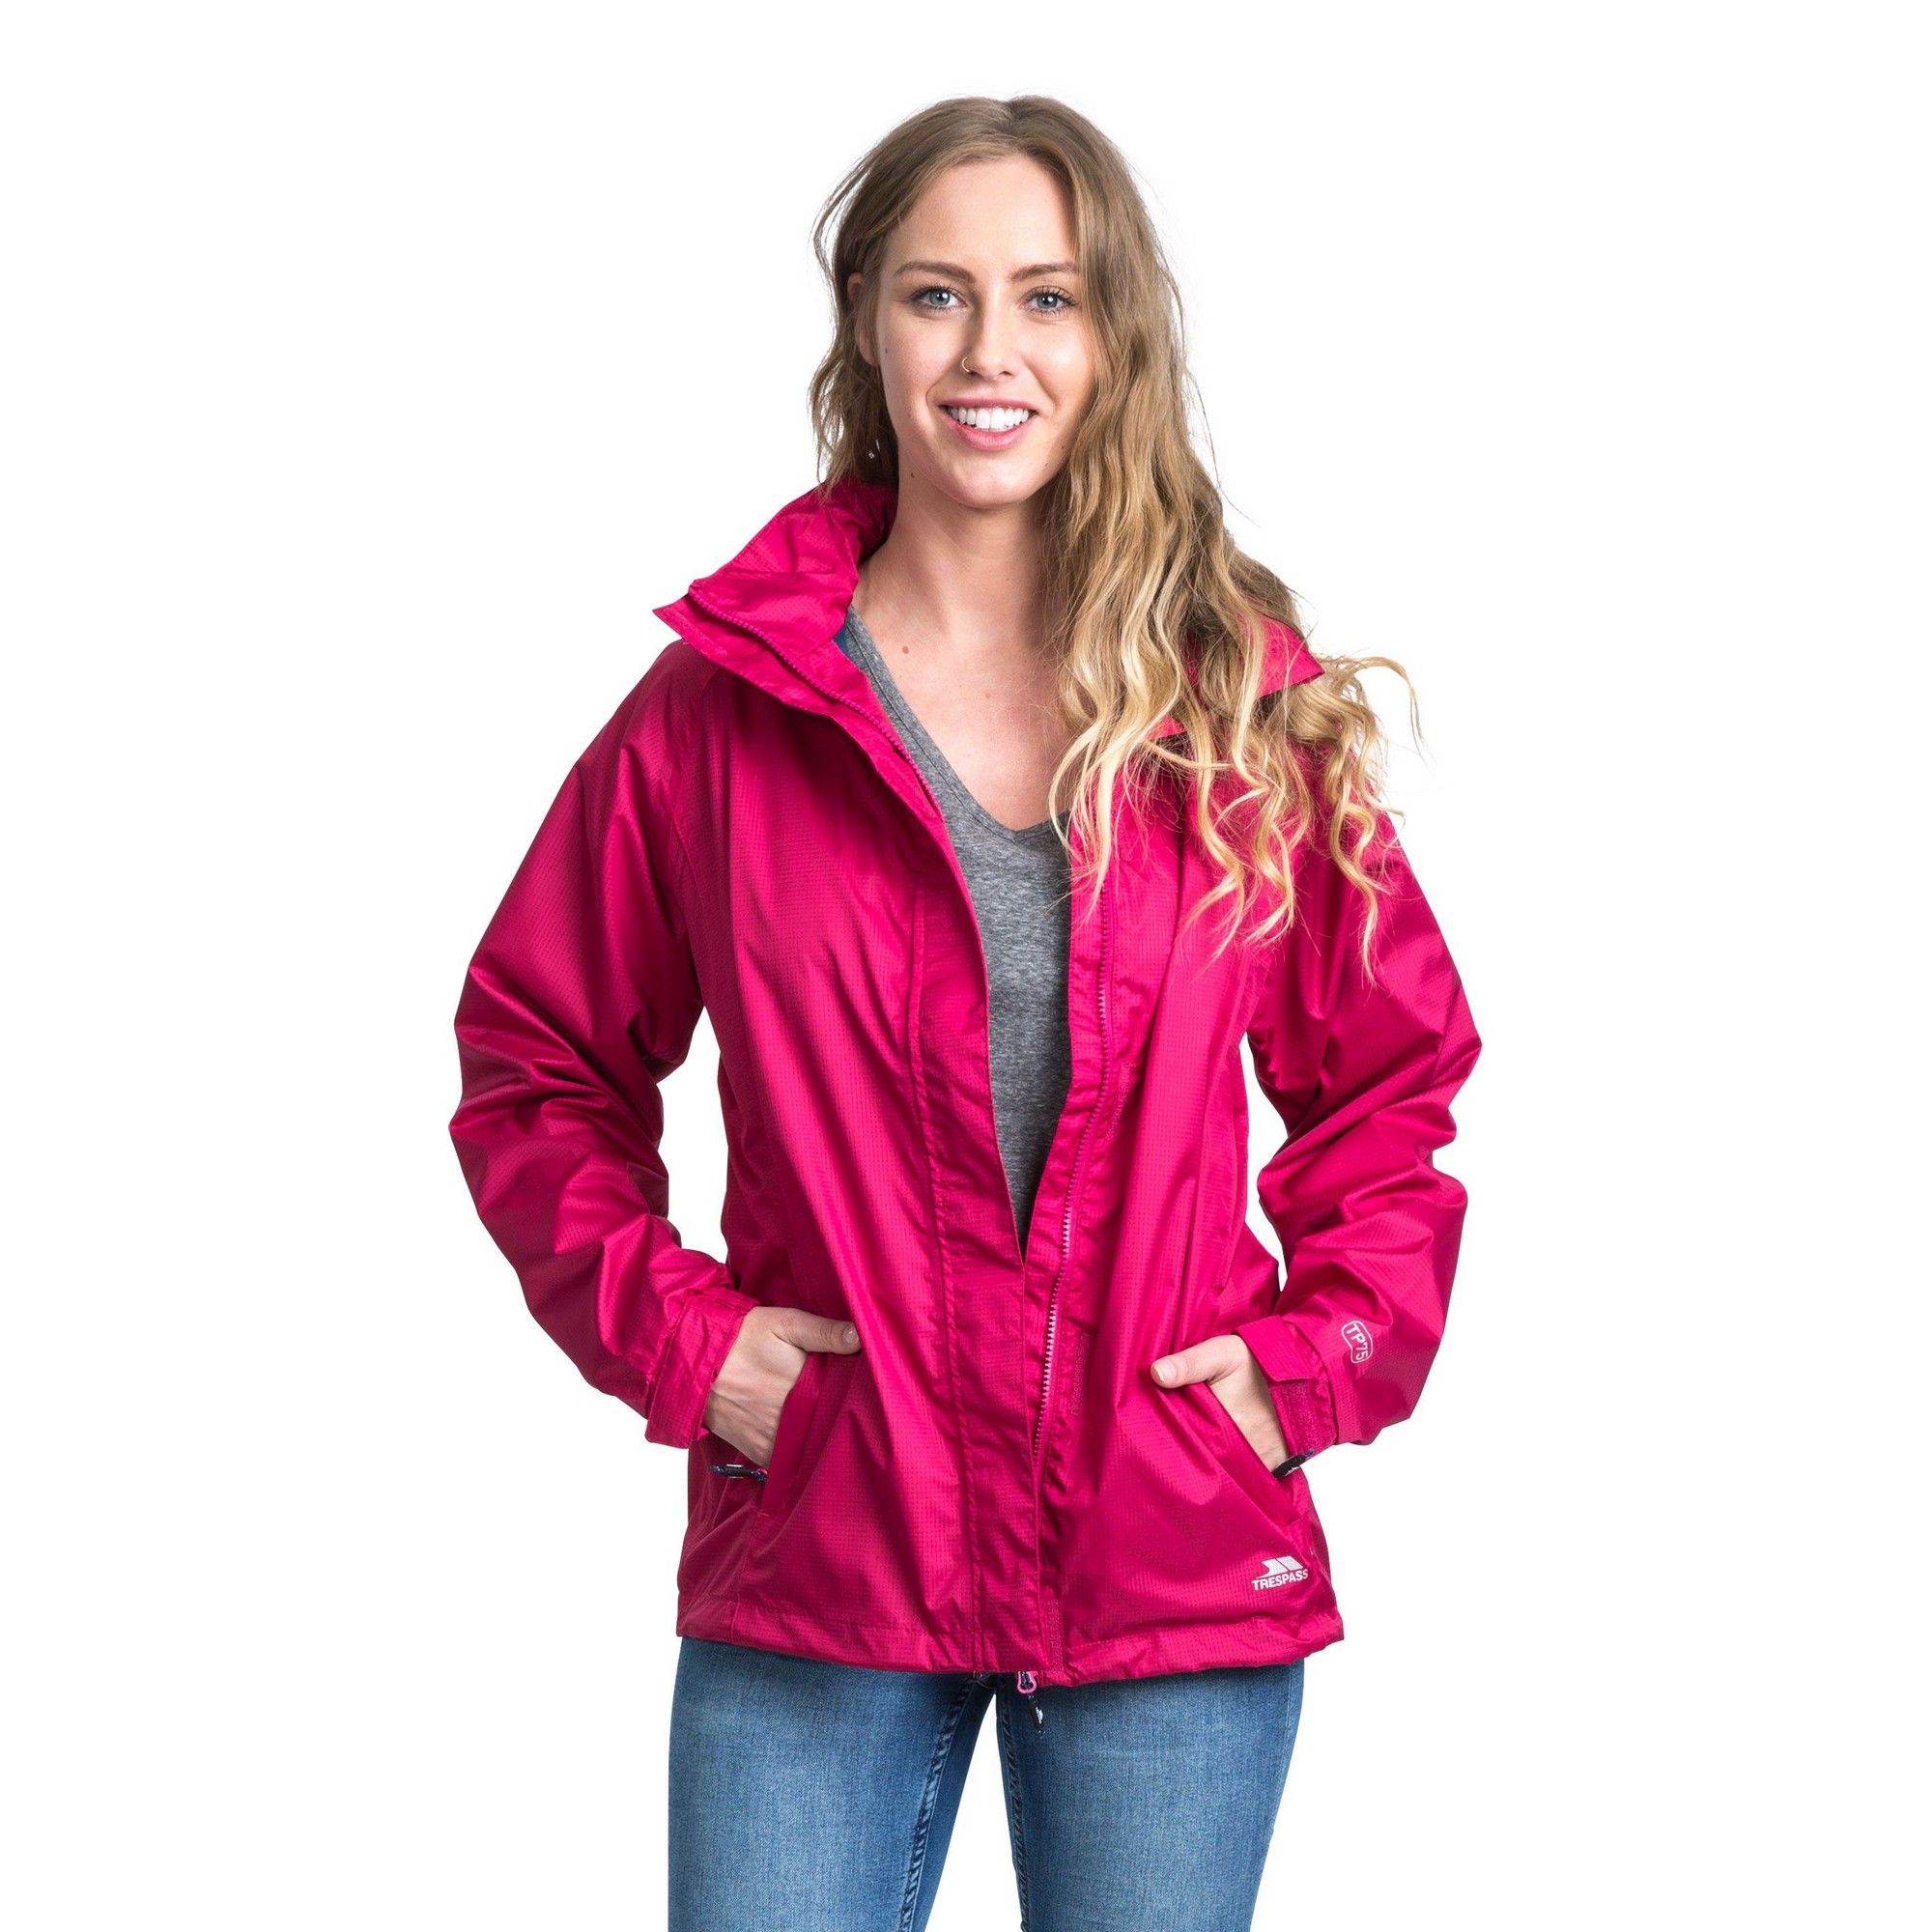 Waterproof jacket with contrast mesh lining. Hood packs into collar. 2 zips pockets. Elasticated cuffs with adjustable tabs. Drawcord at hem. Waterproof 3000mm, breathable 3000mvp, windproof, taped seams. Shell: 100% polyester. Lining: 100% polyester mesh. Trespass Womens Chest Sizing (approx): XS/8 - 32in/81cm, S/10 - 34in/86cm, M/12 - 36in/91.4cm, L/14 - 38in/96.5cm, XL/16 - 40in/101.5cm, XXL/18 - 42in/106.5cm.